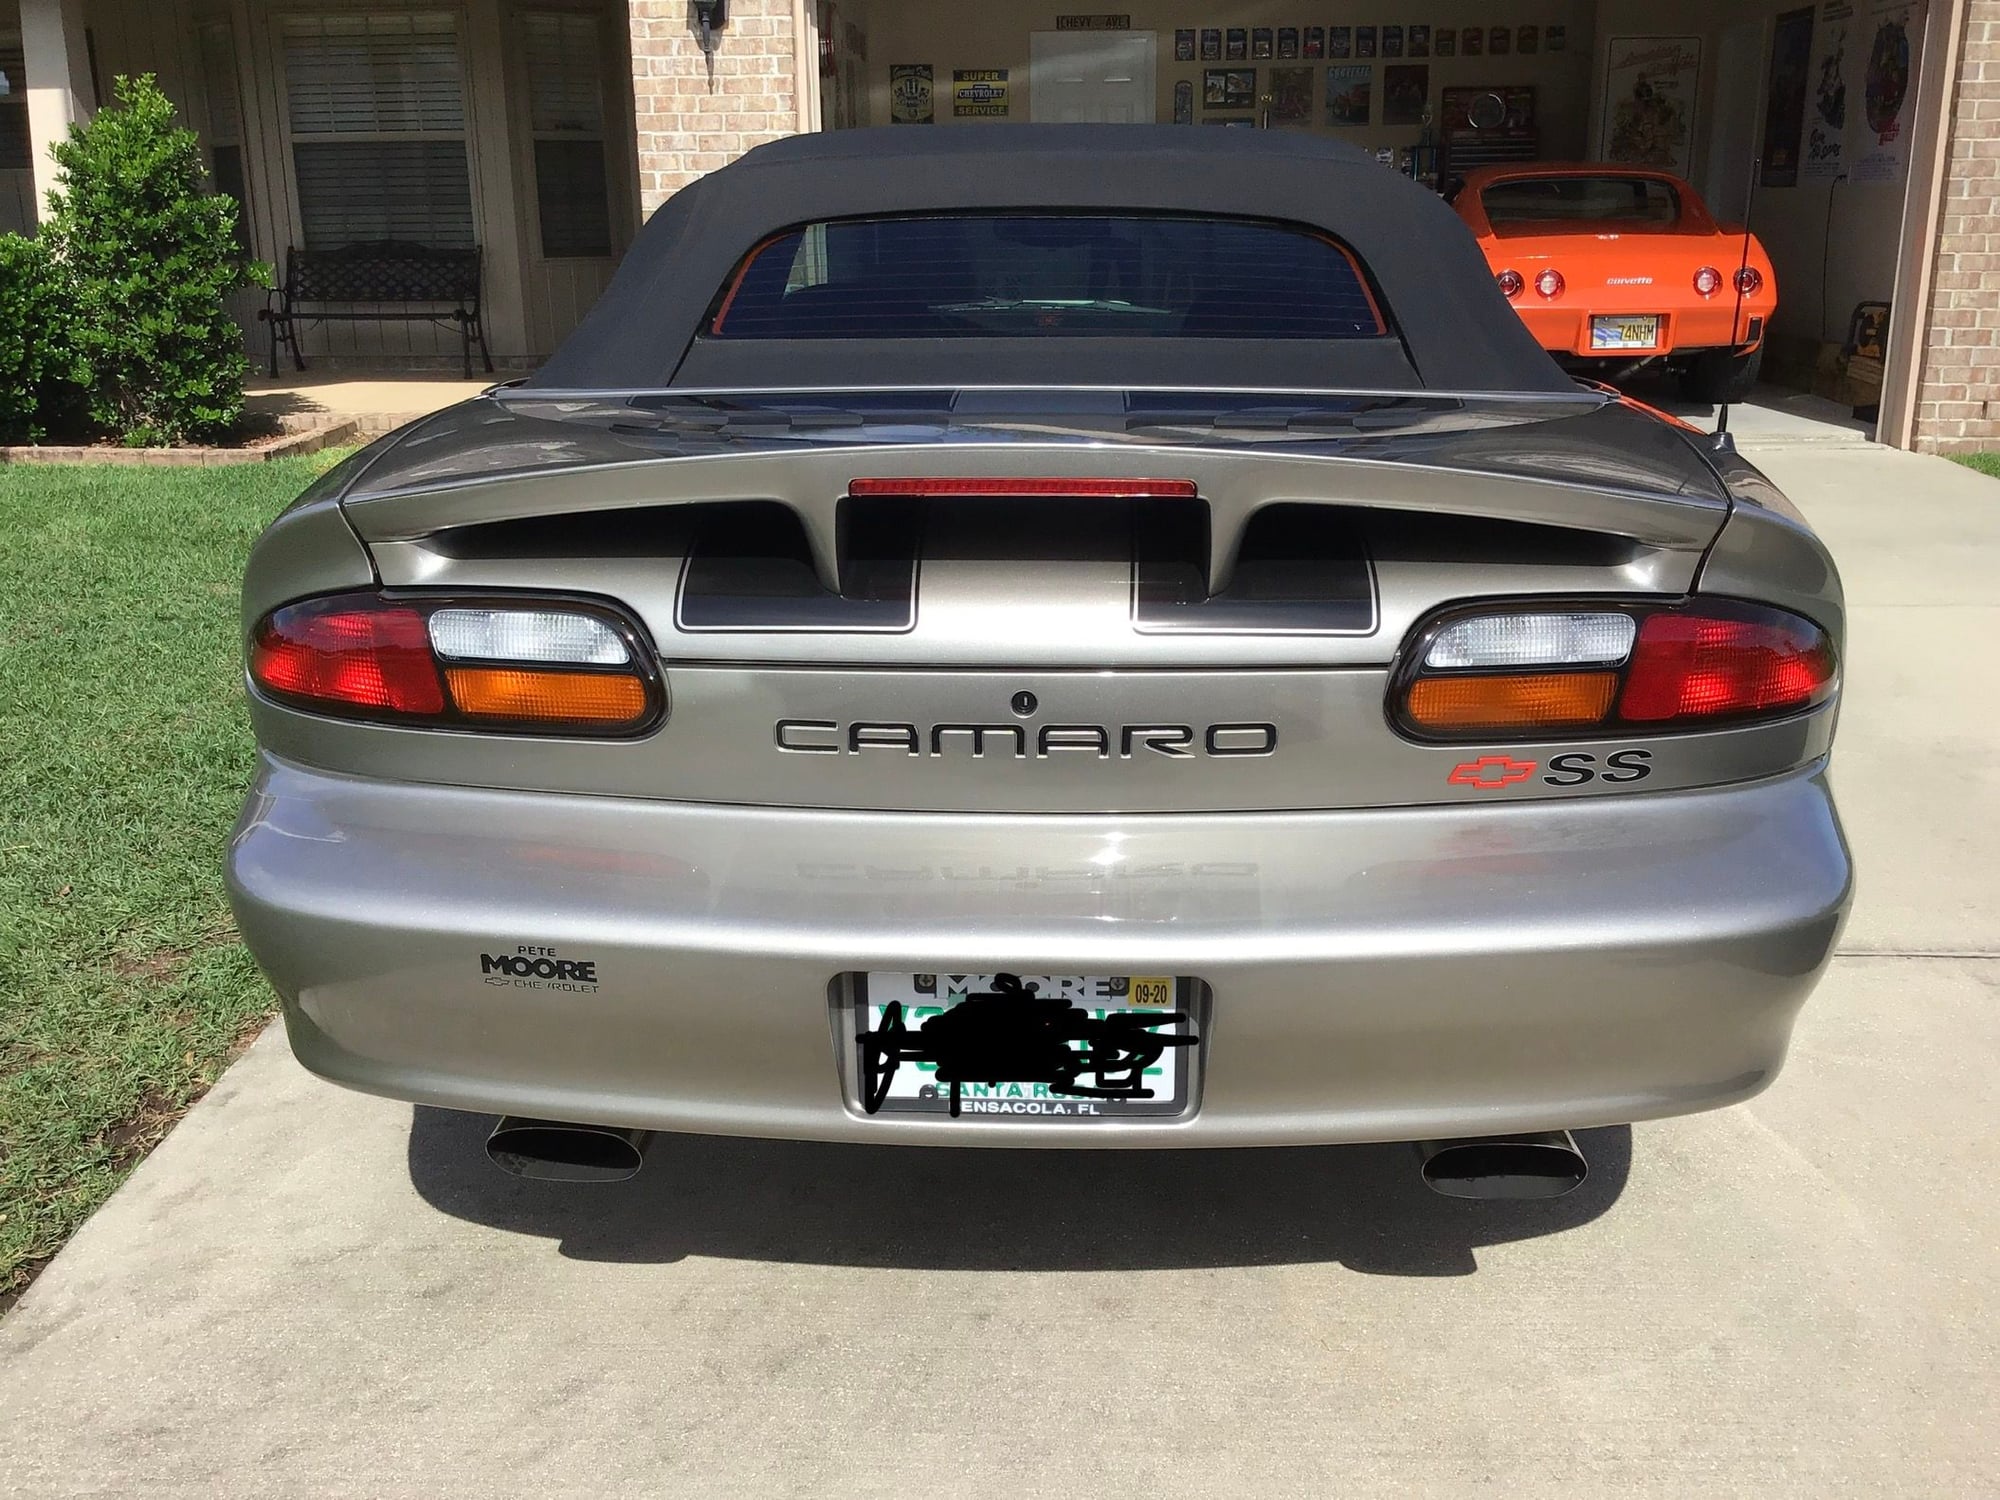 1999 Chevrolet Camaro - 1999 Camaro SS Convertible - Used - VIN 2G1FP32G4X2140040 - 43,202 Miles - 8 cyl - 2WD - Automatic - Coupe - Other - Milton, FL 32570, United States